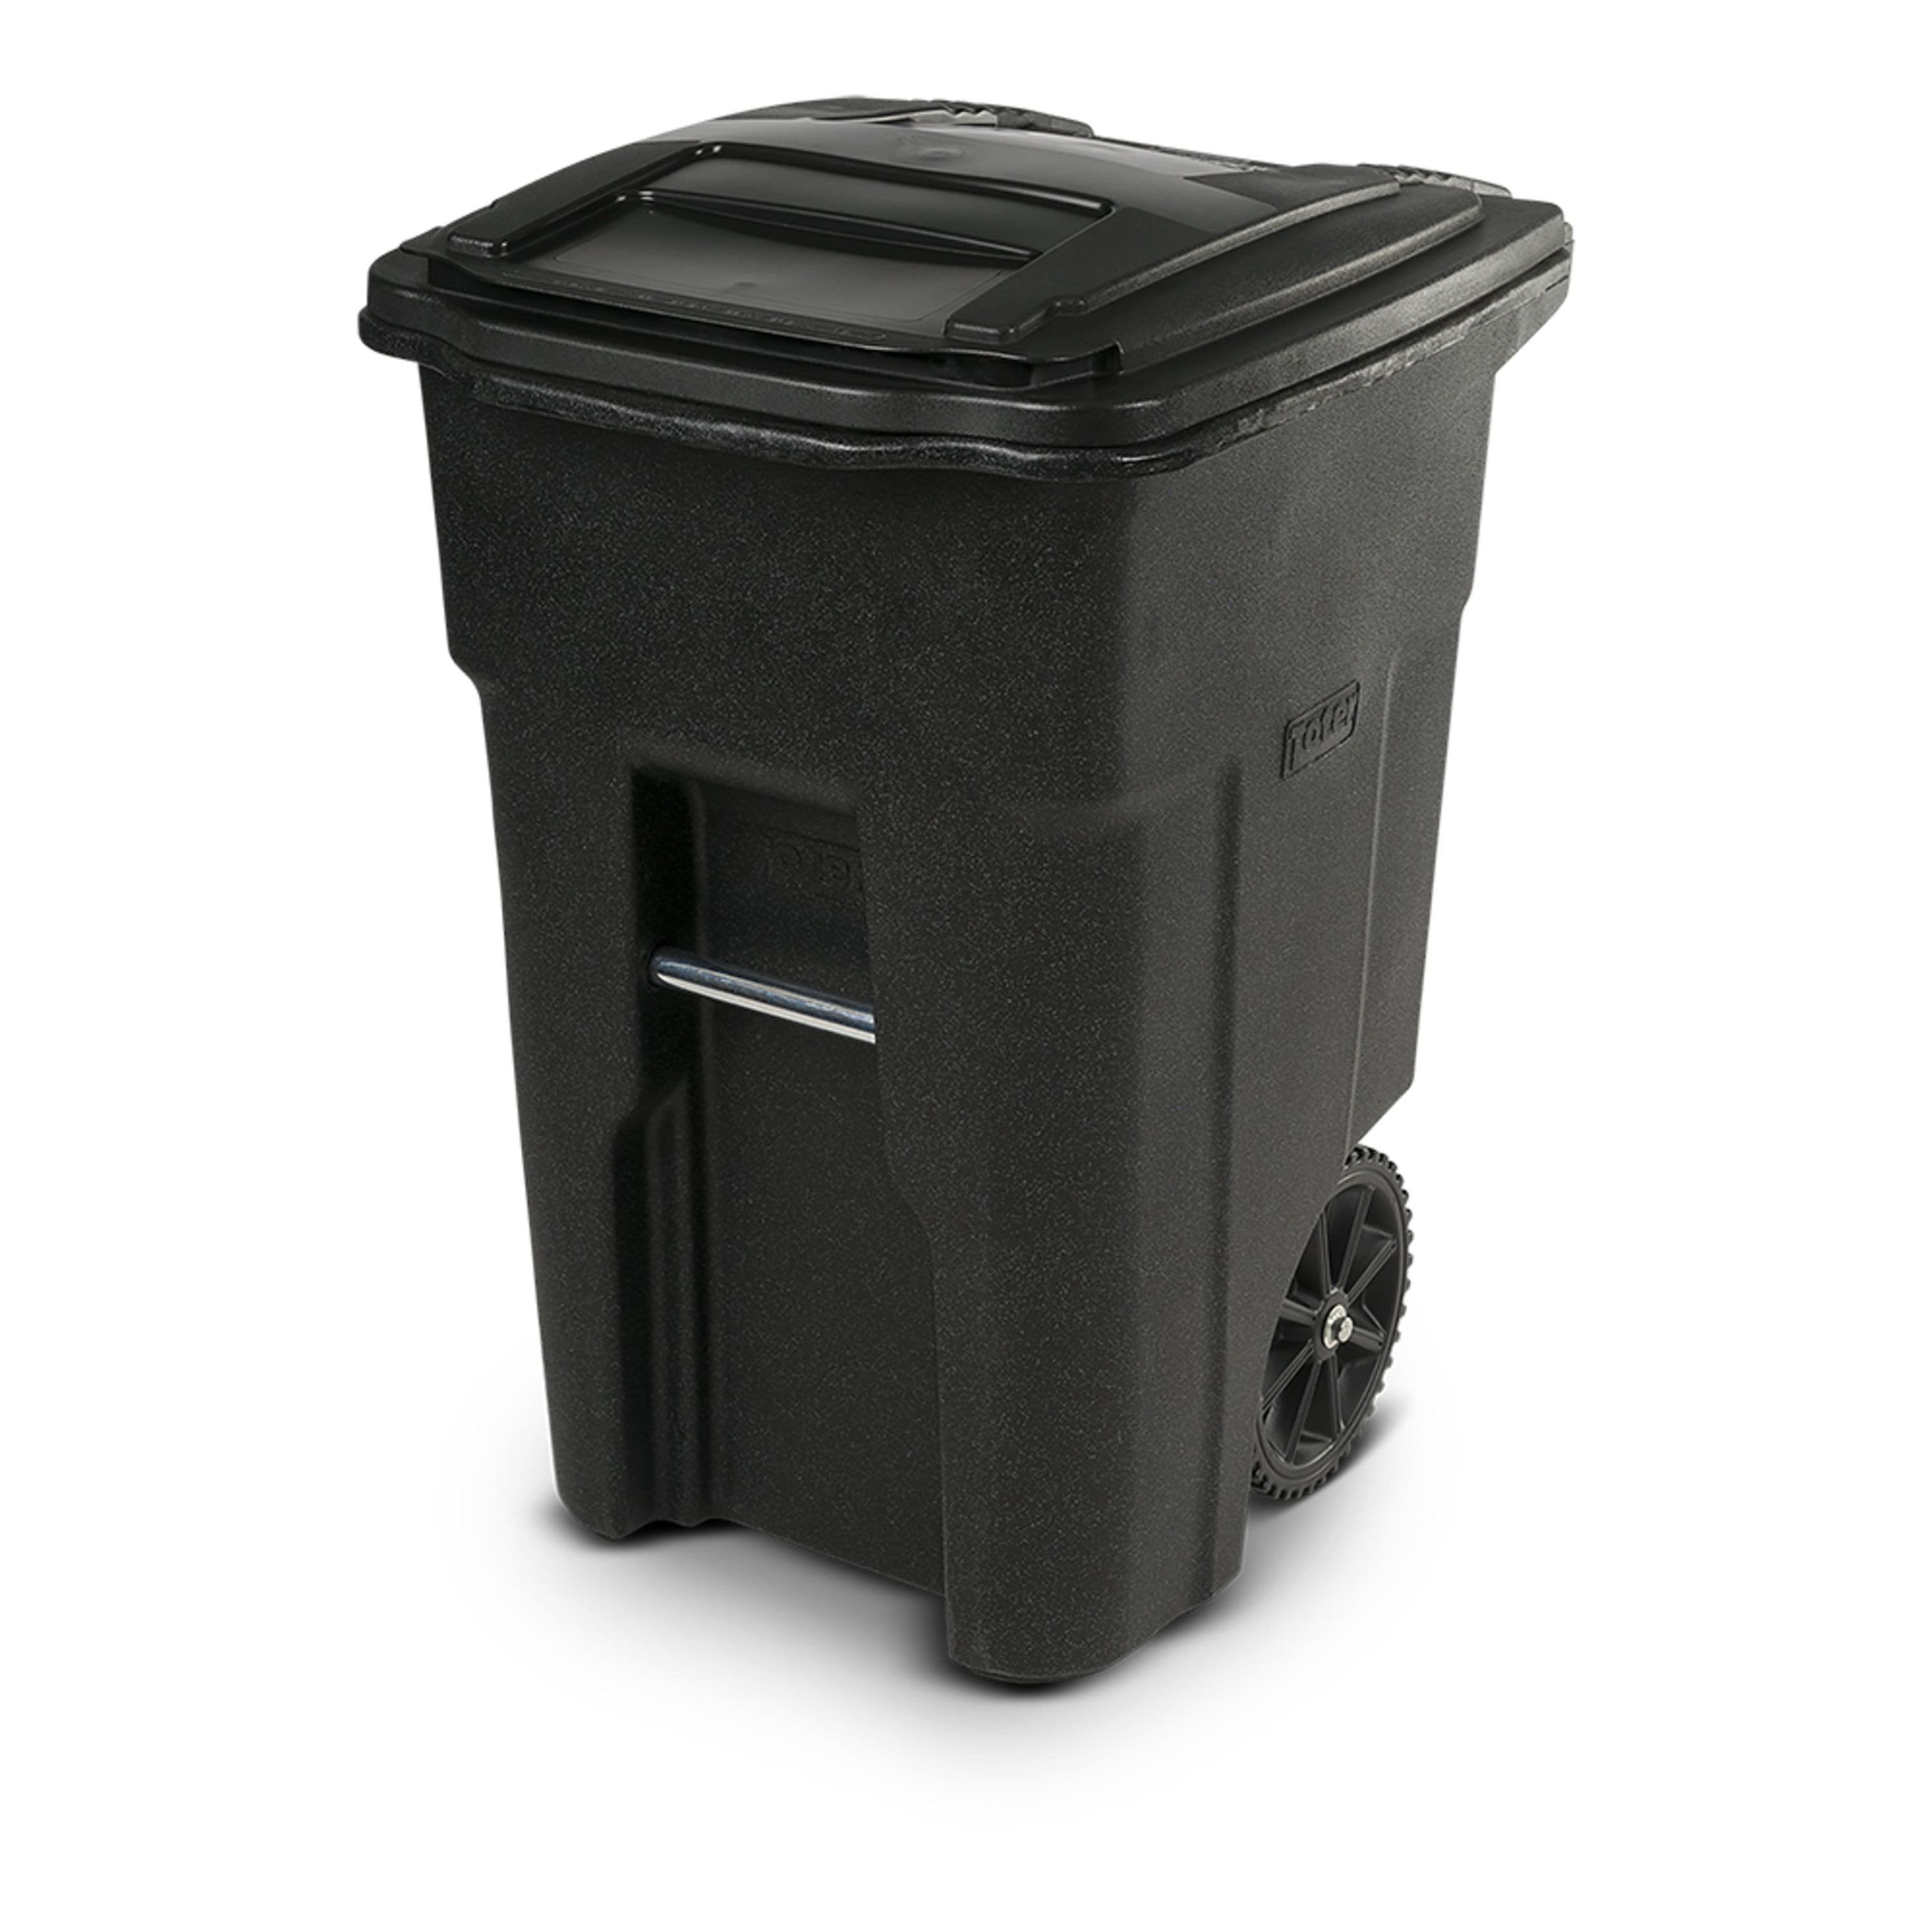 Rubbermaid Trash Can Lid Roughneck 45 Gal Plastic Replacement Black Cover Hinge 